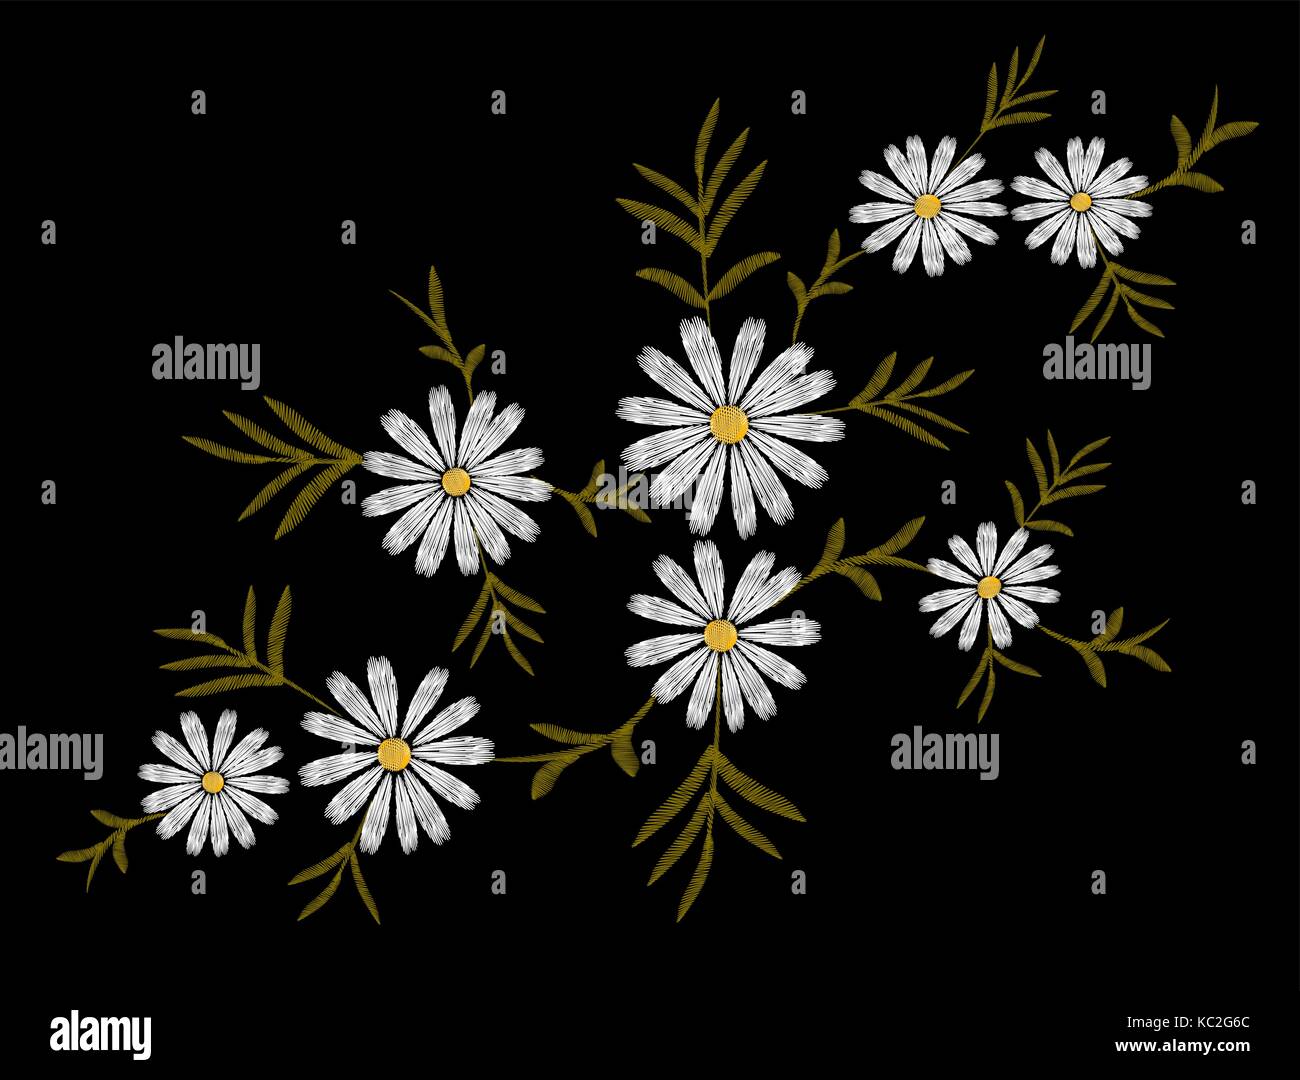 Embroidery flower daisy gerbera herb sticker patch fashion print textile vector illustration. White delicate vintage ornament art Stock Vector